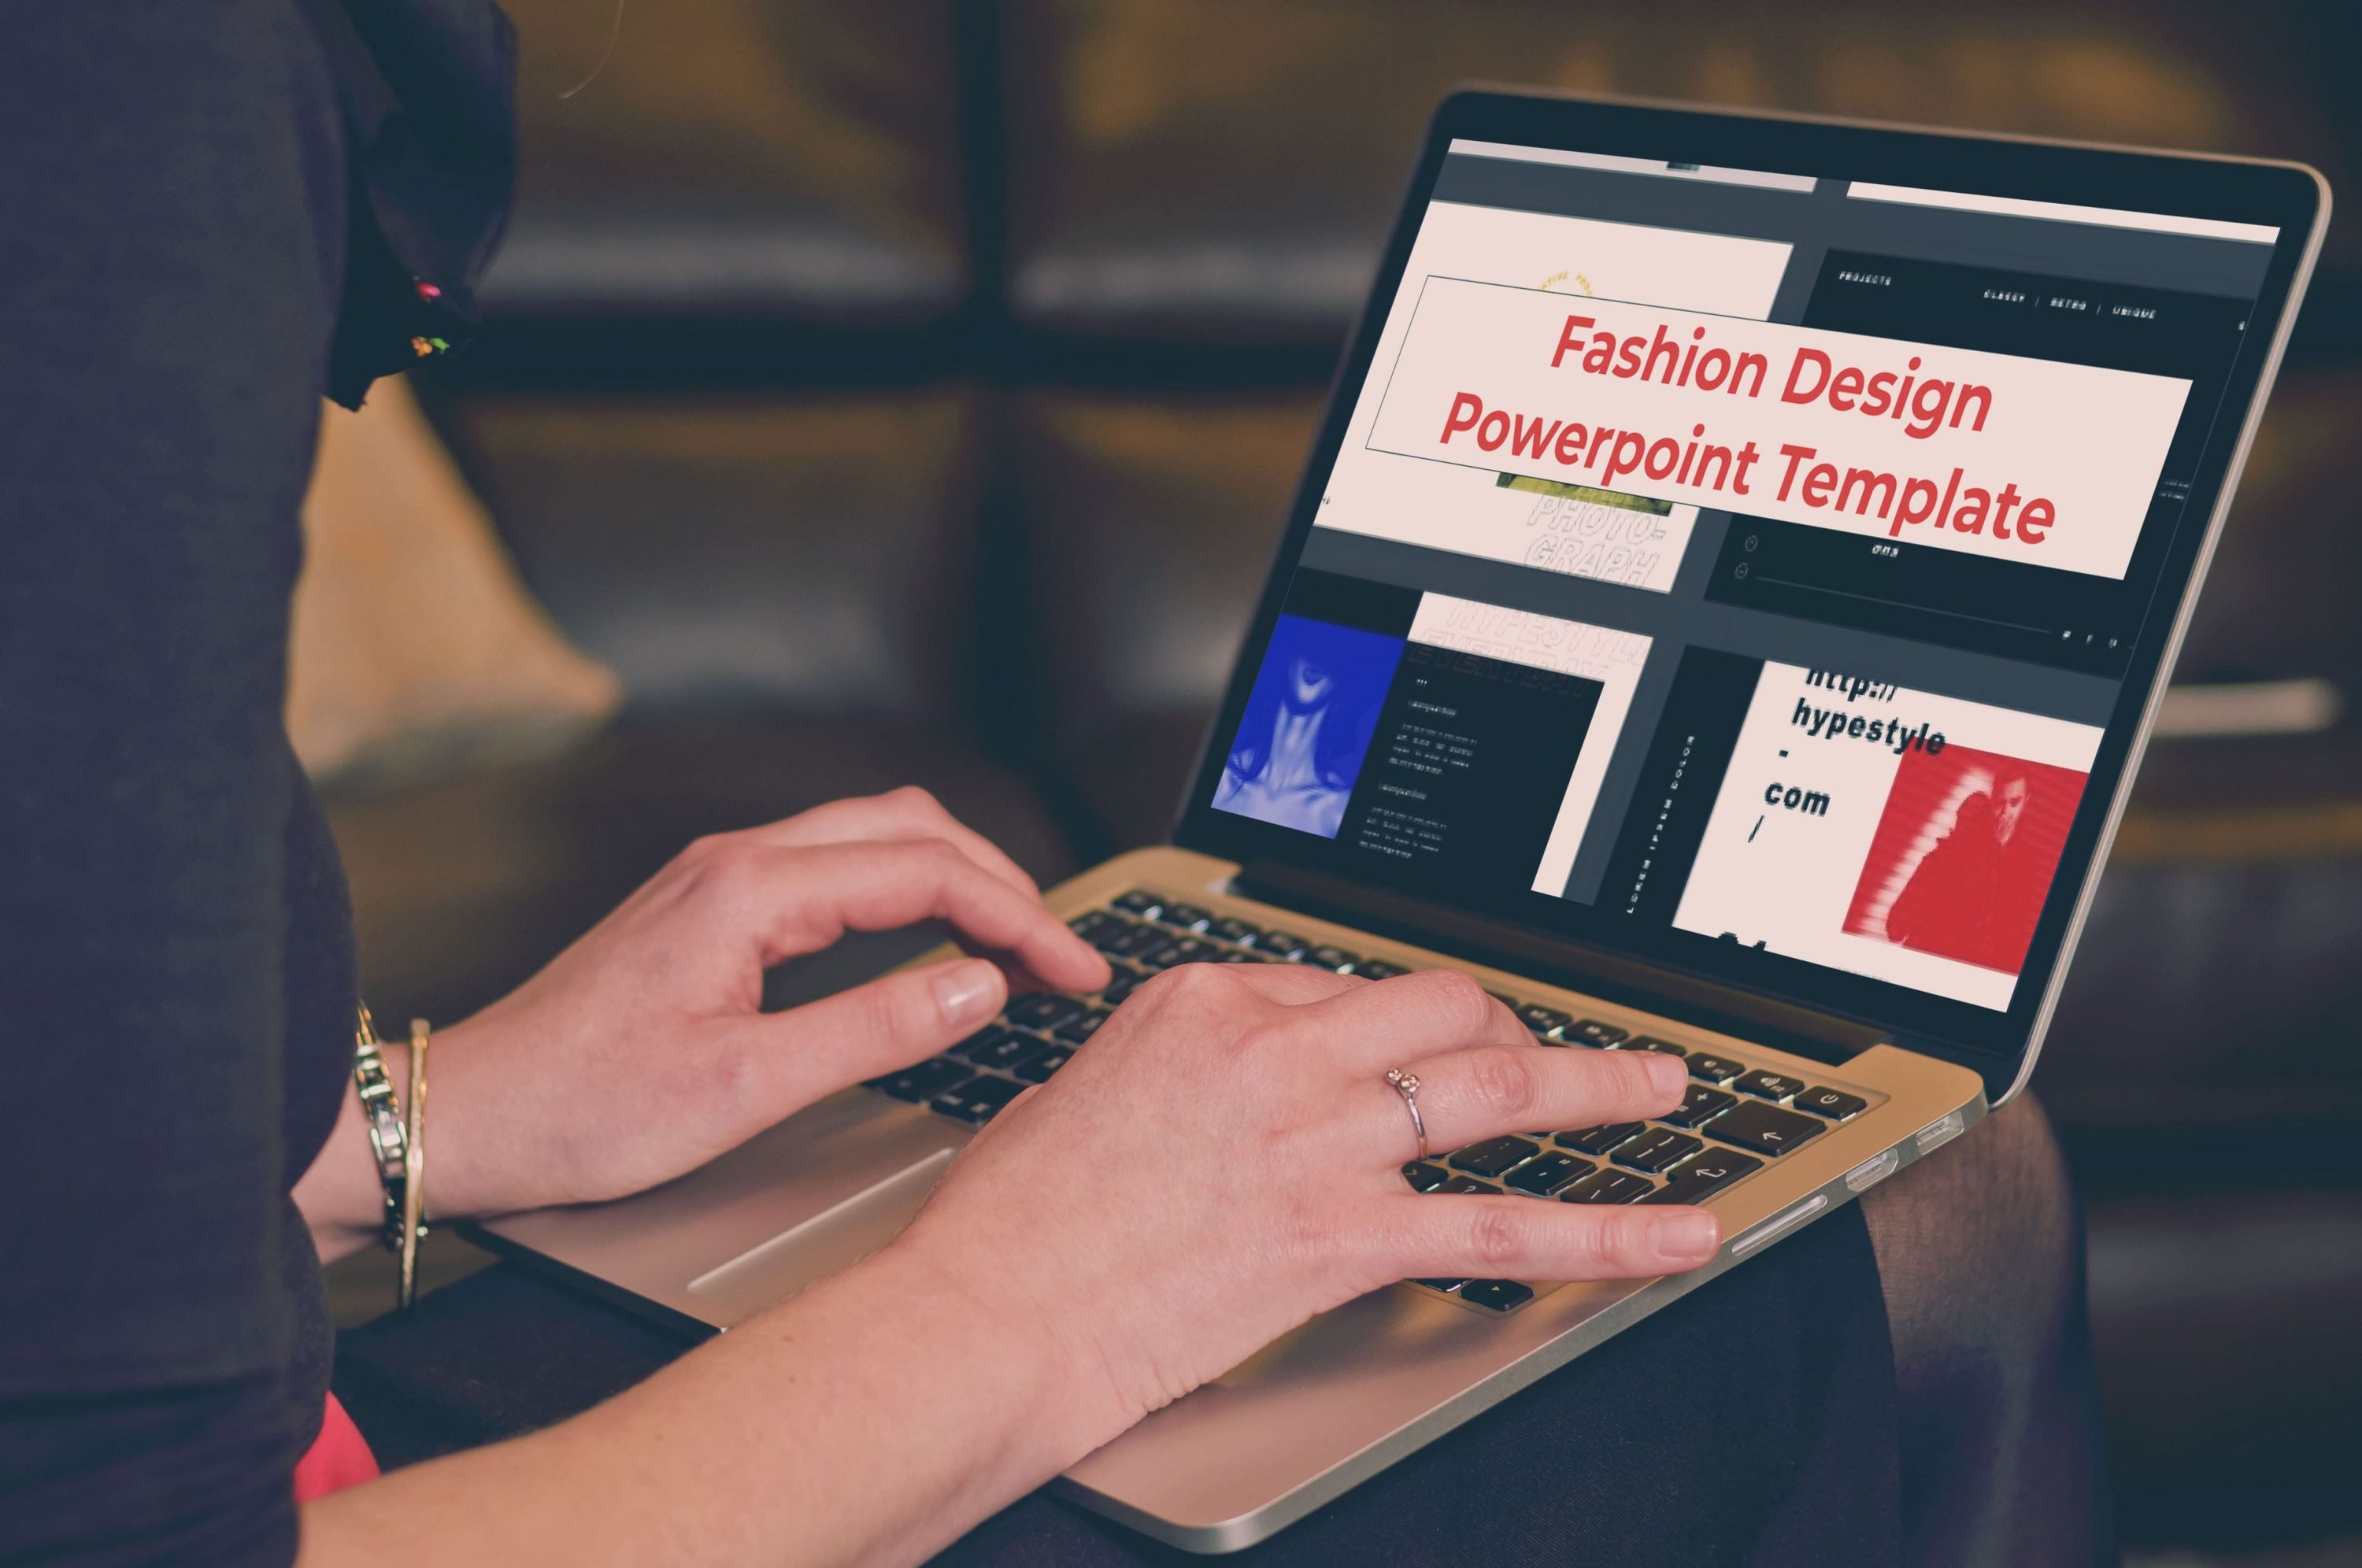 Laptop option of the Fashion Design Powerpoint Template.